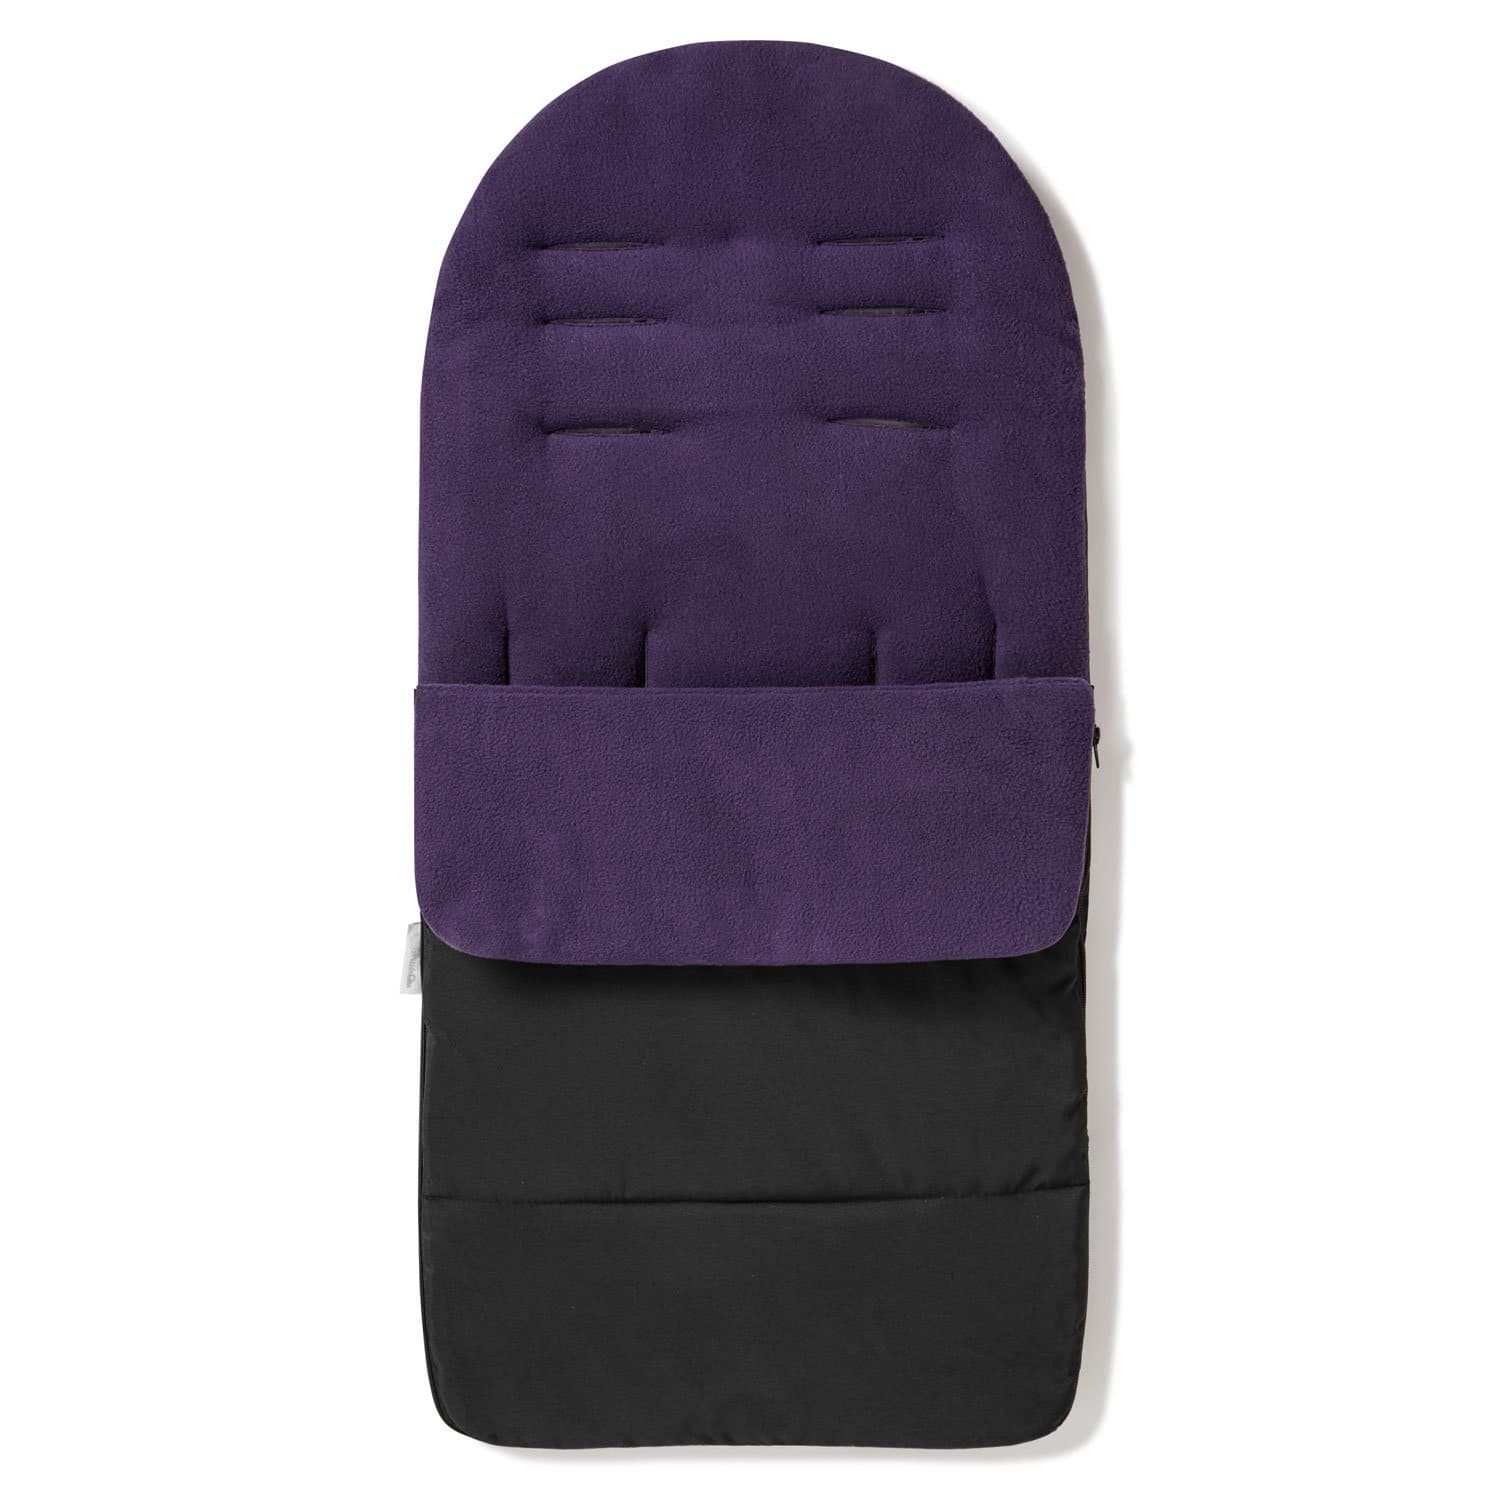 Premium Footmuff / Cosy Toes Compatible with Tippitoes - Plum Purple / Fits All Models | For Your Little One